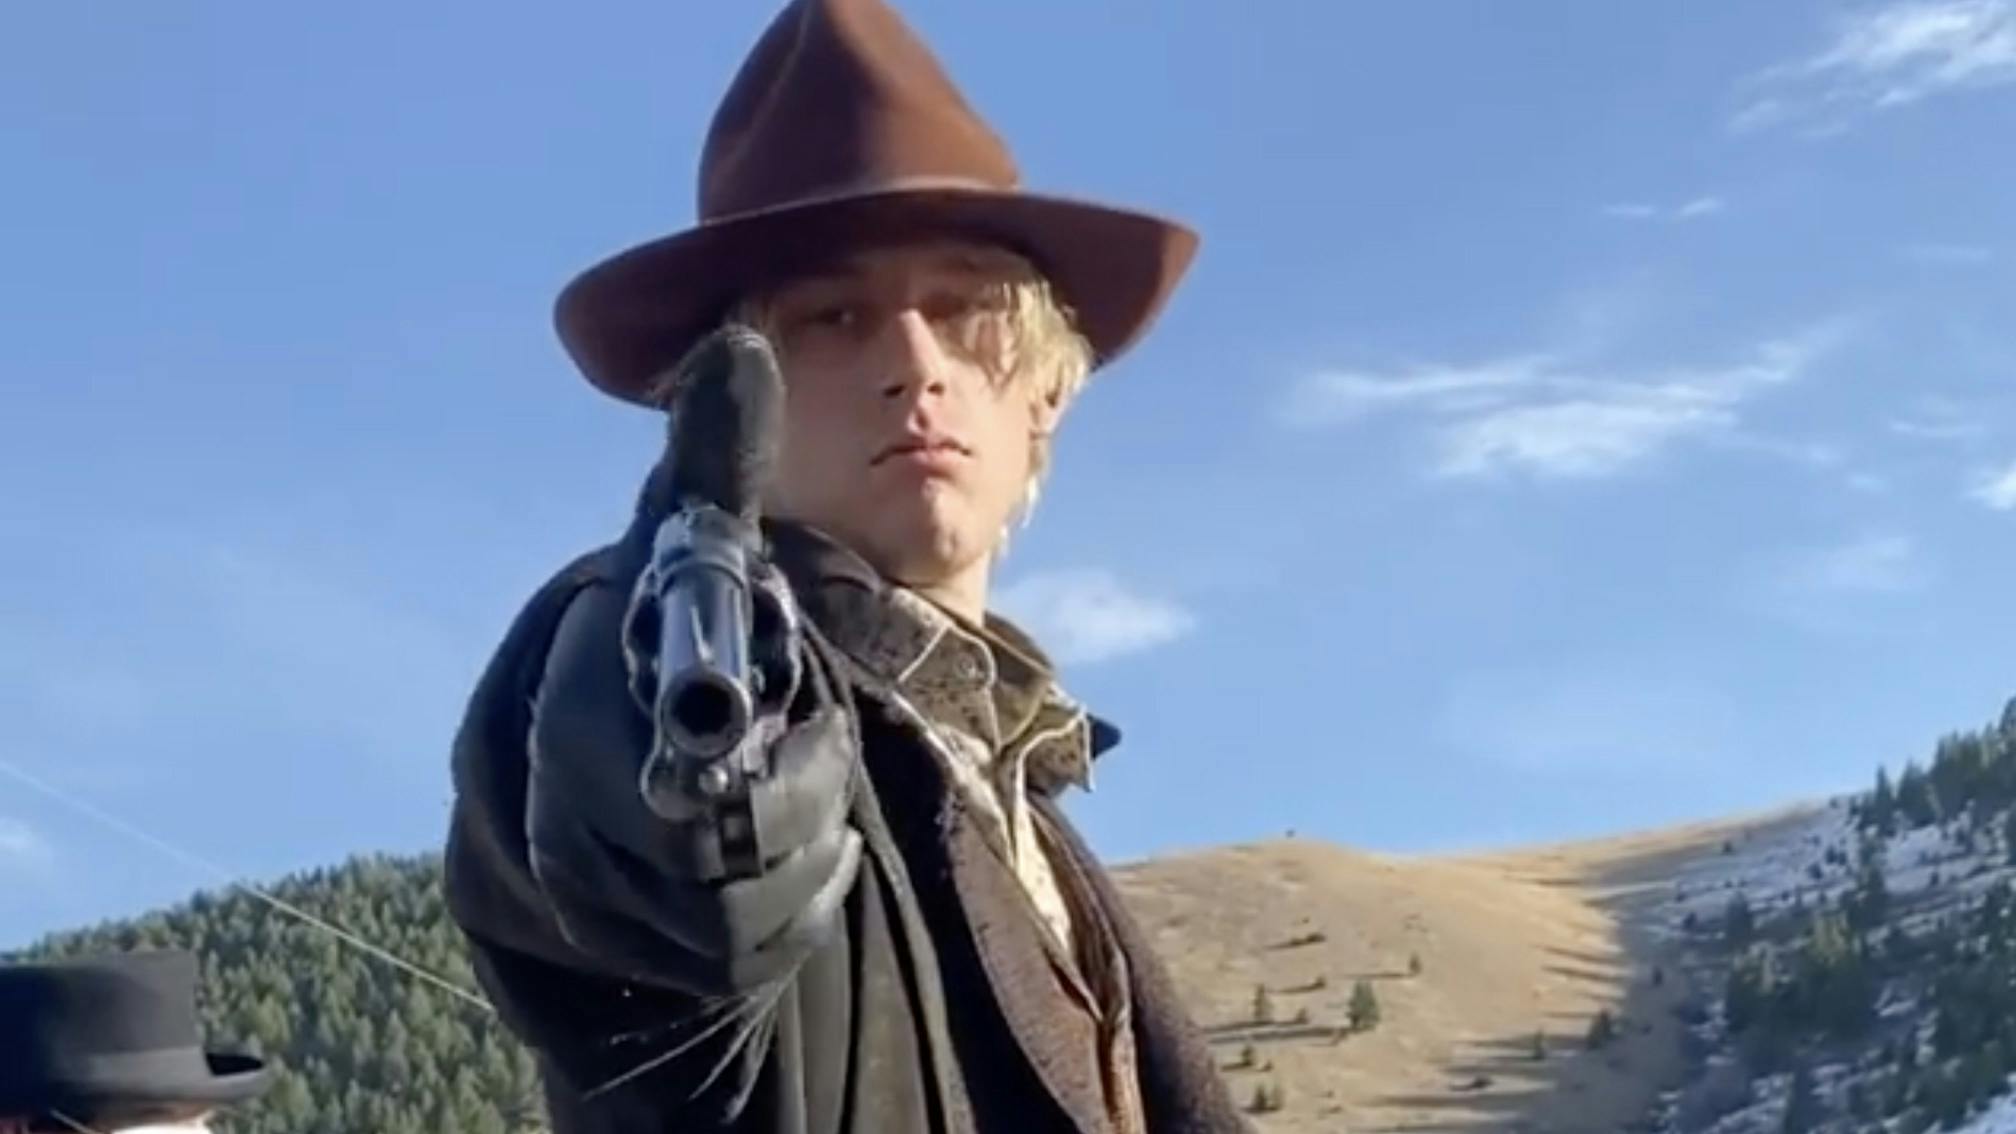 MGK Gets His Cowboy On In Video Teaser From New Western Movie The Last Son Of Isaac LeMay